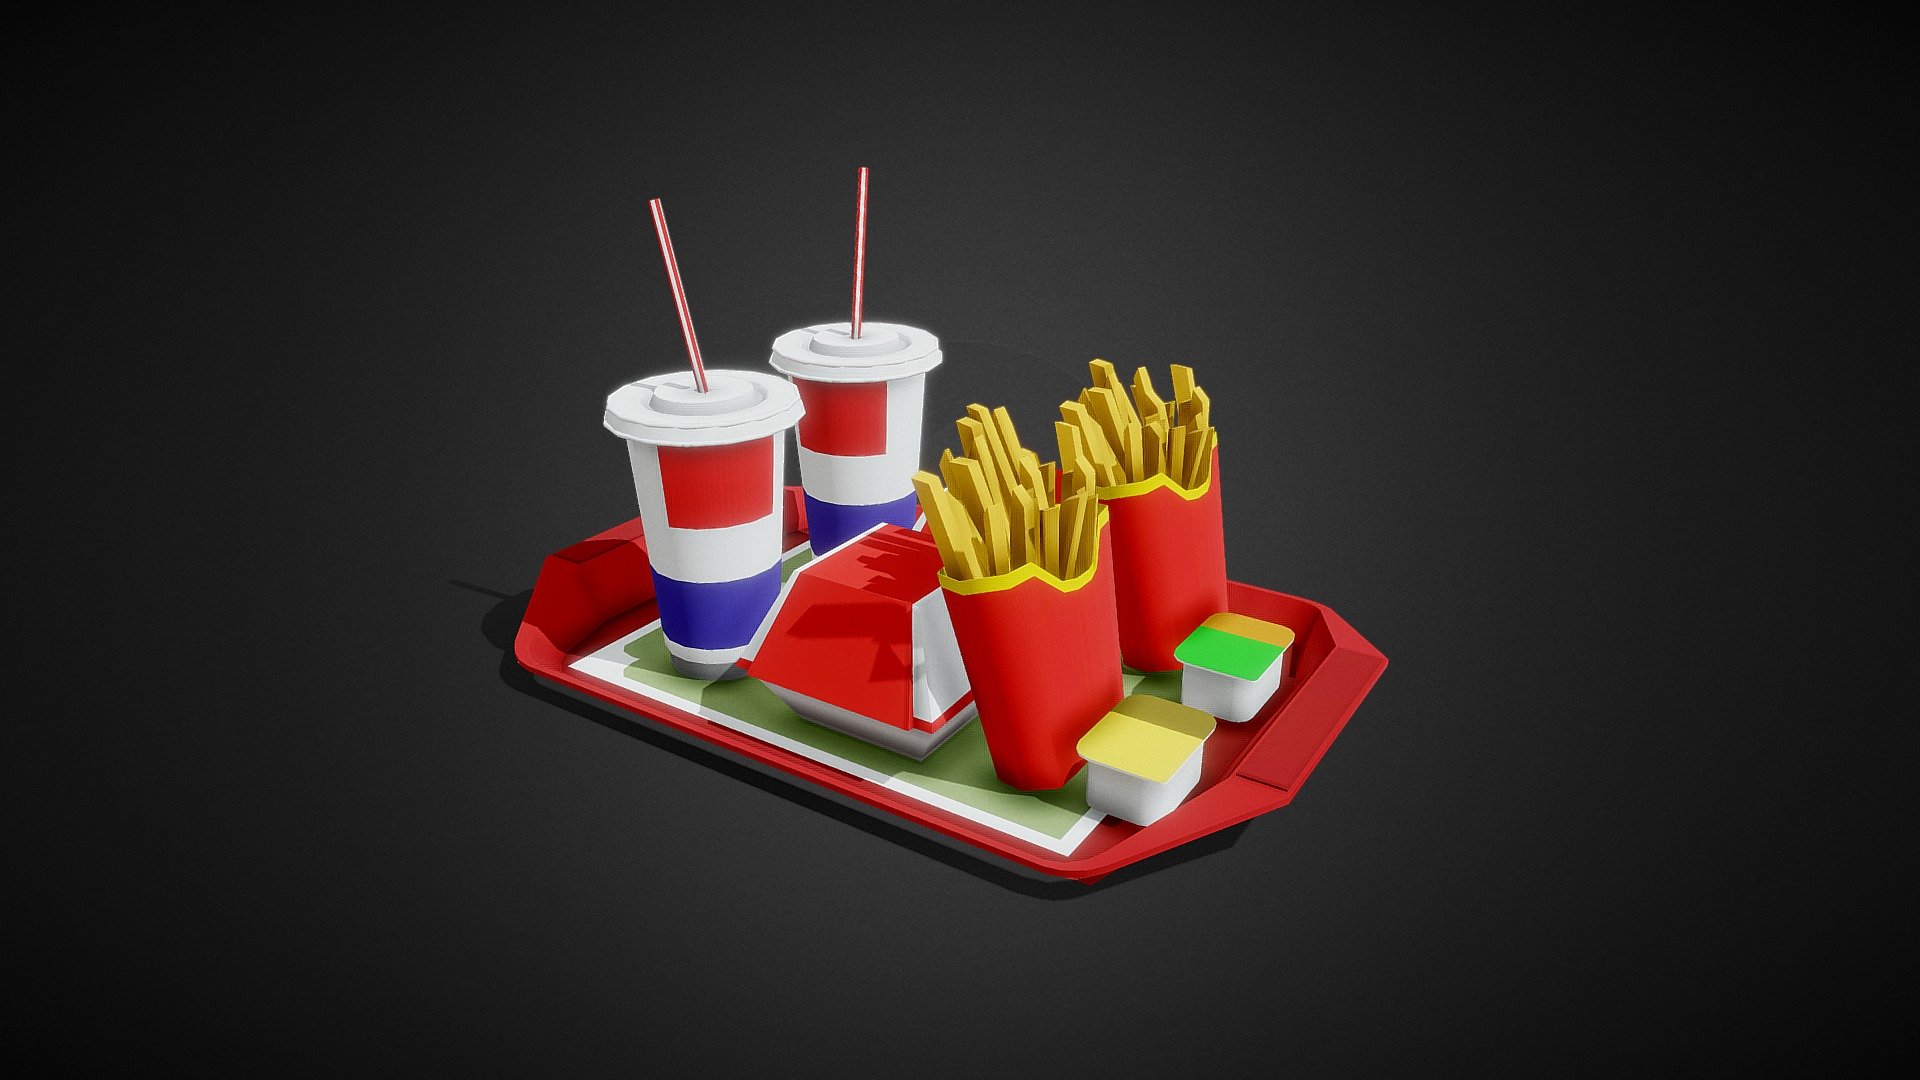 A tray with food from a famous fast food restaurant chain. Good for illustrations and various renderings - Low poly fast food - 3D model by Shvetsov Kirill (@shvetsovkirill) 3d model